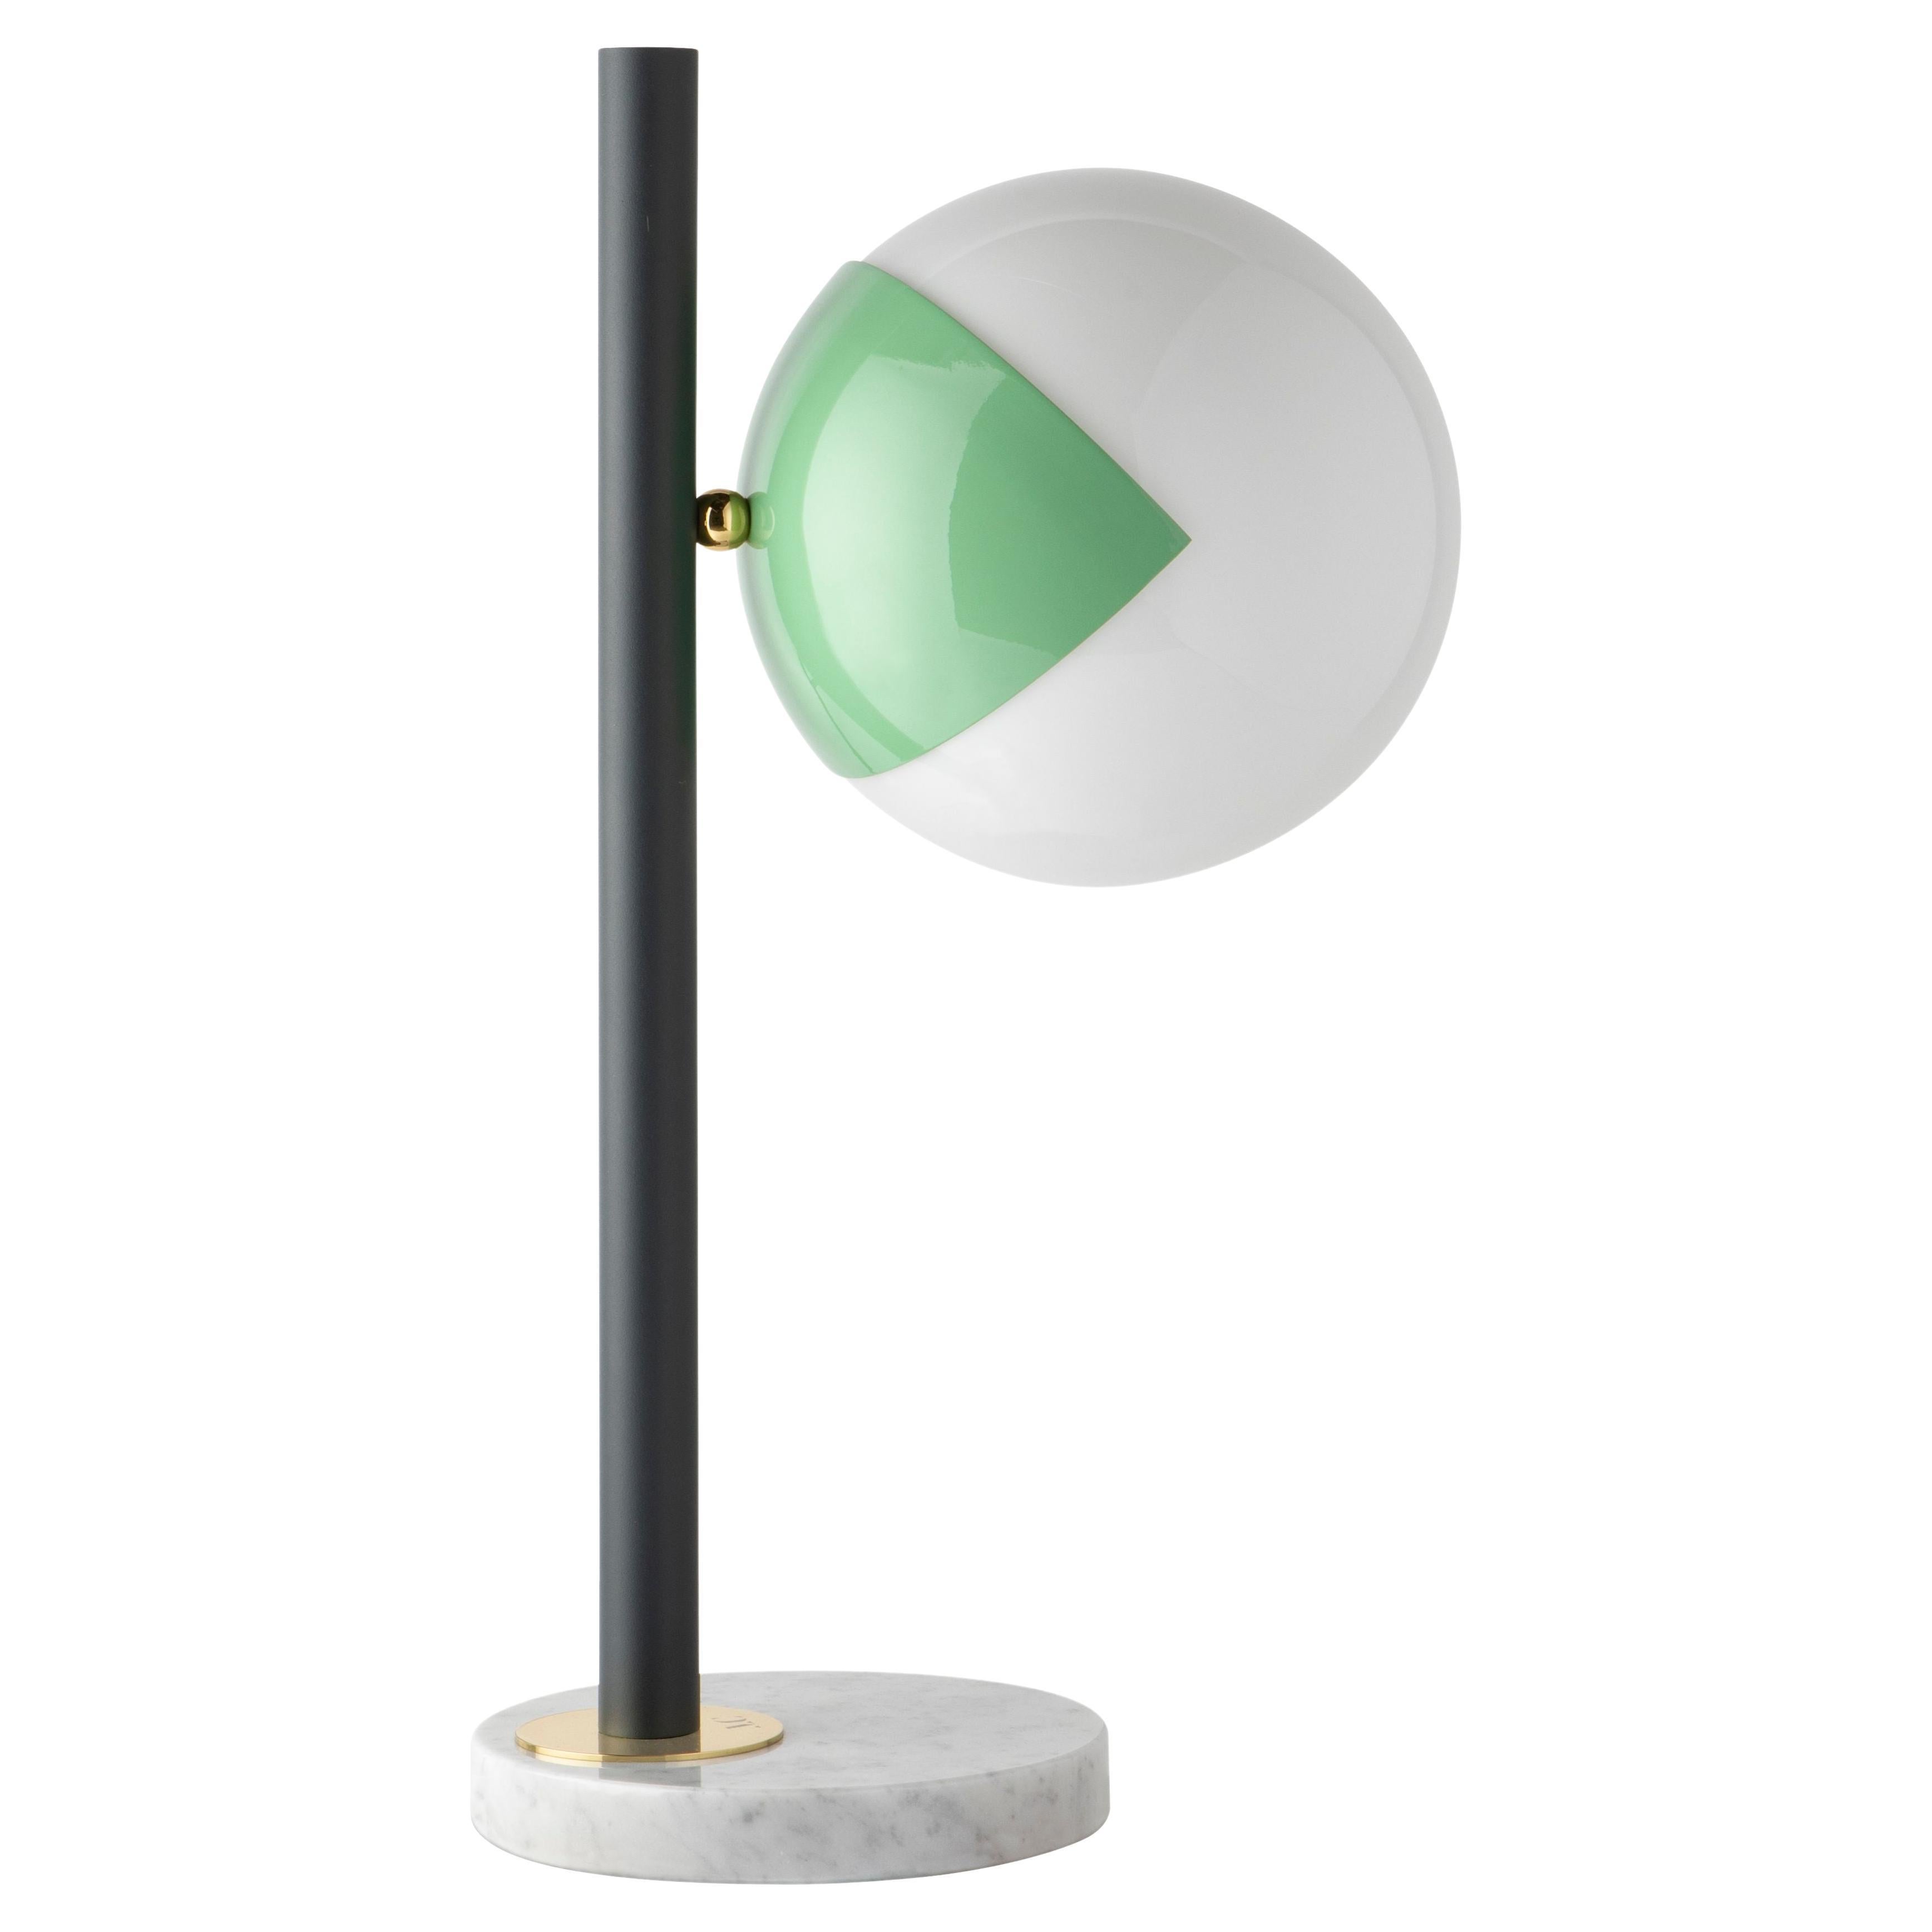 Yellow dimmable table lamp pop-up black by Magic Circus Editions
Dimensions: Ø 22 x 30 x 53 cm 
Materials: carrara marble base, smooth brass tube, glossy mouth blown glass

All our lamps can be wired according to each country. If sold to the USA